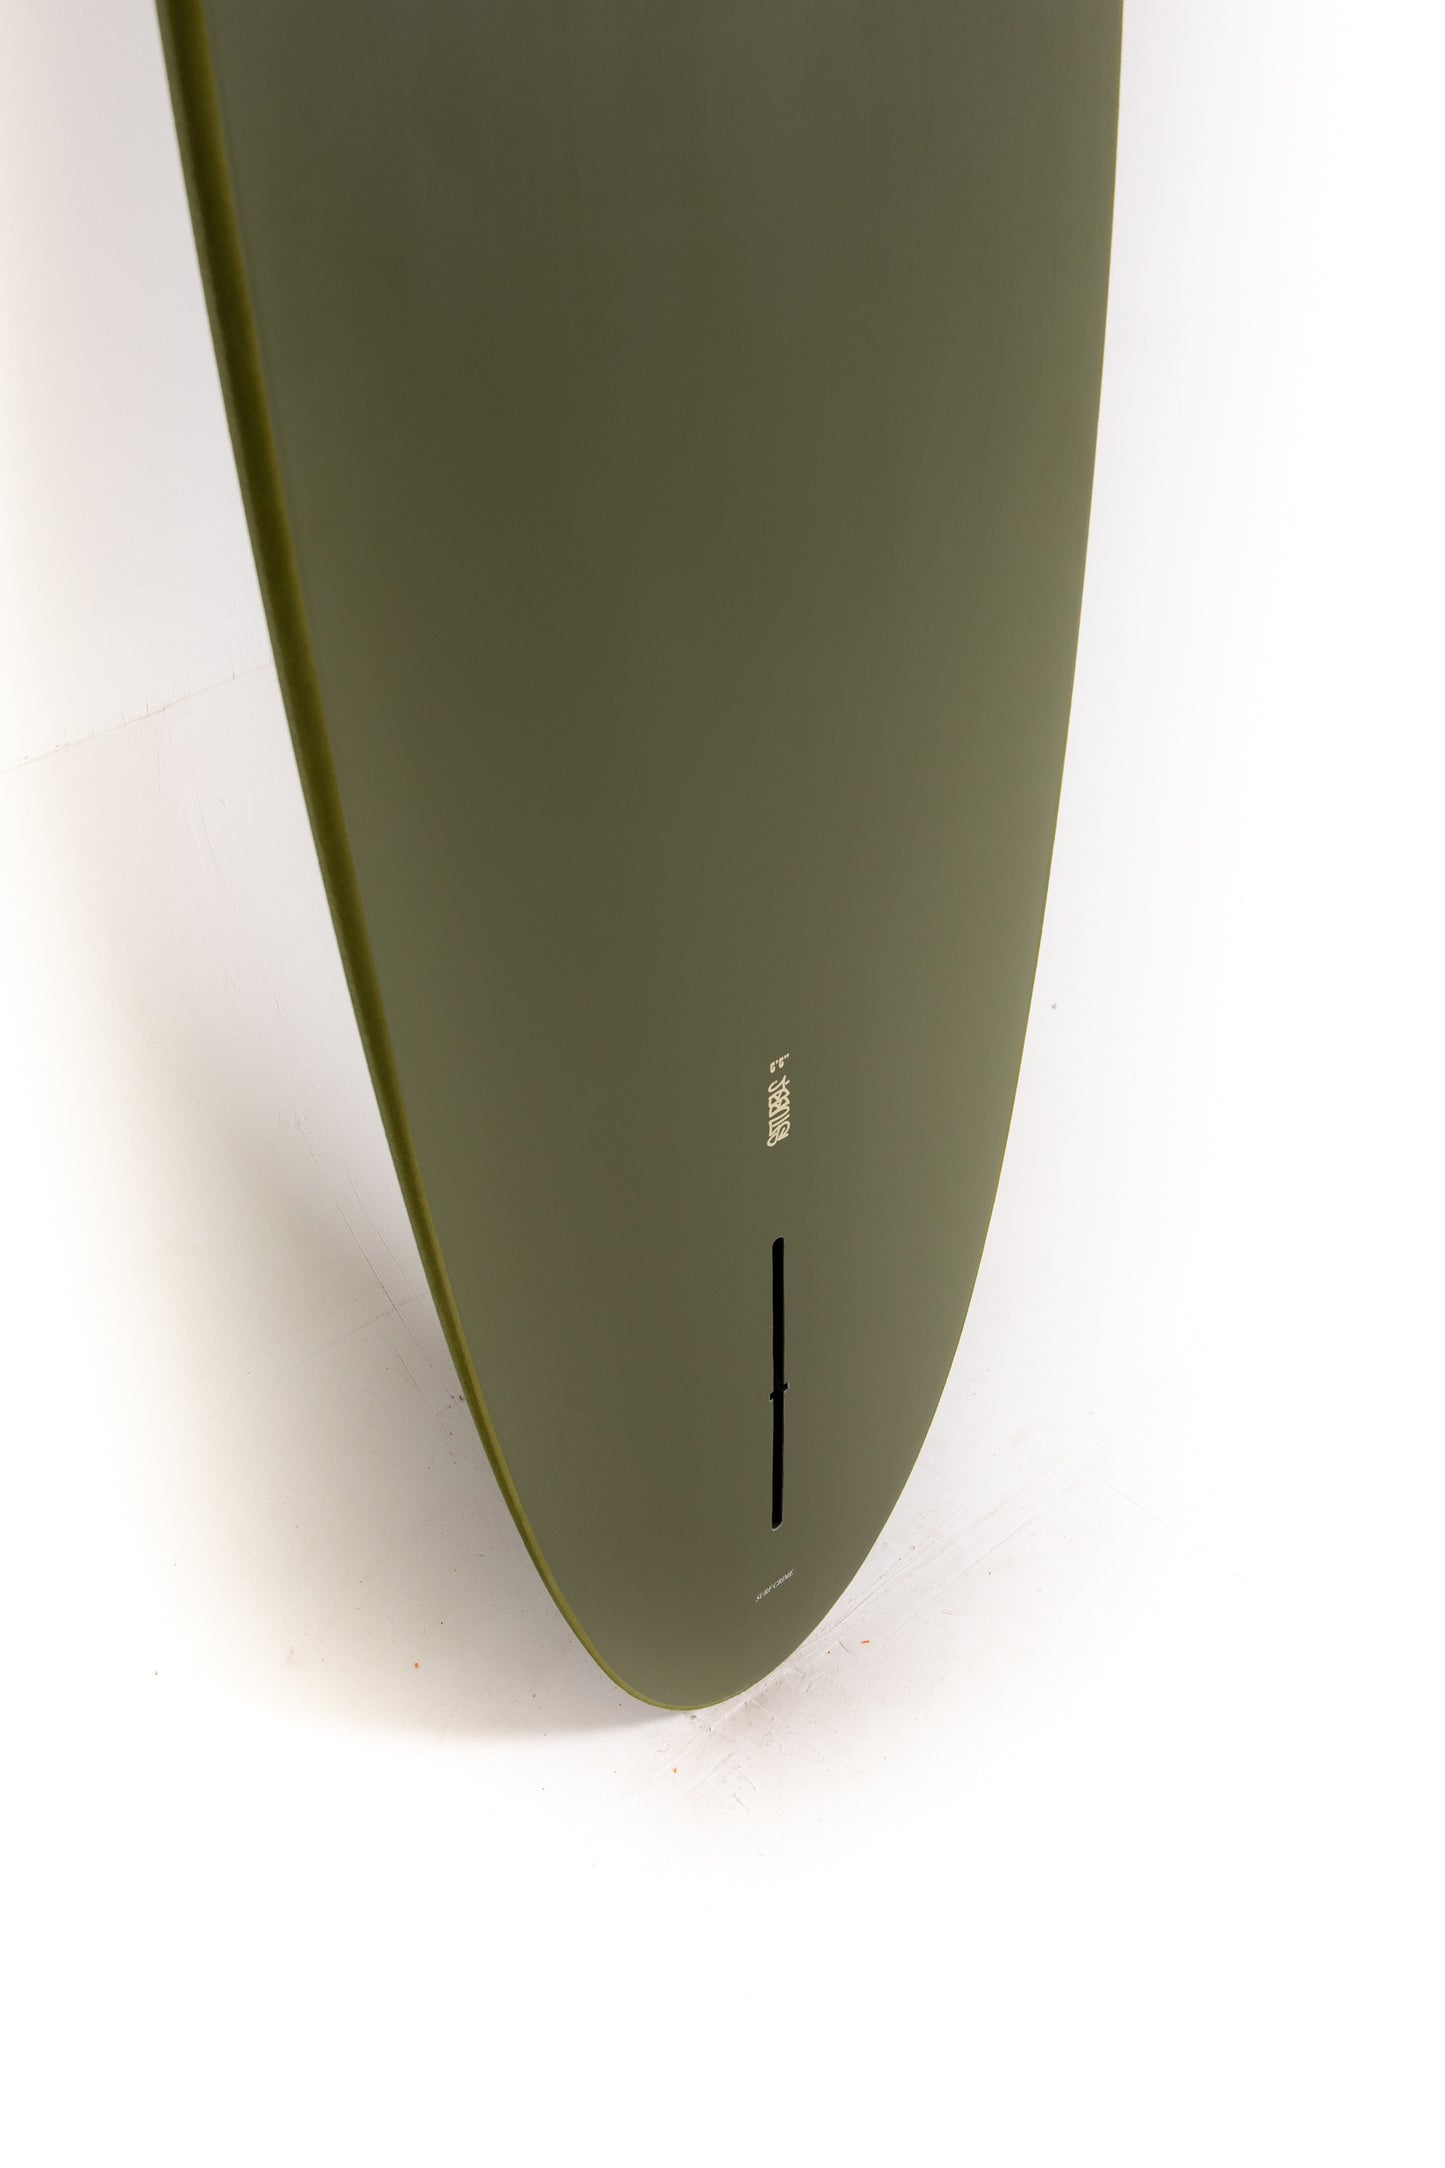 
                  
                    Pukas-Surf-Shop-Crime-Surfboards-Stubby-Army-6_6
                  
                